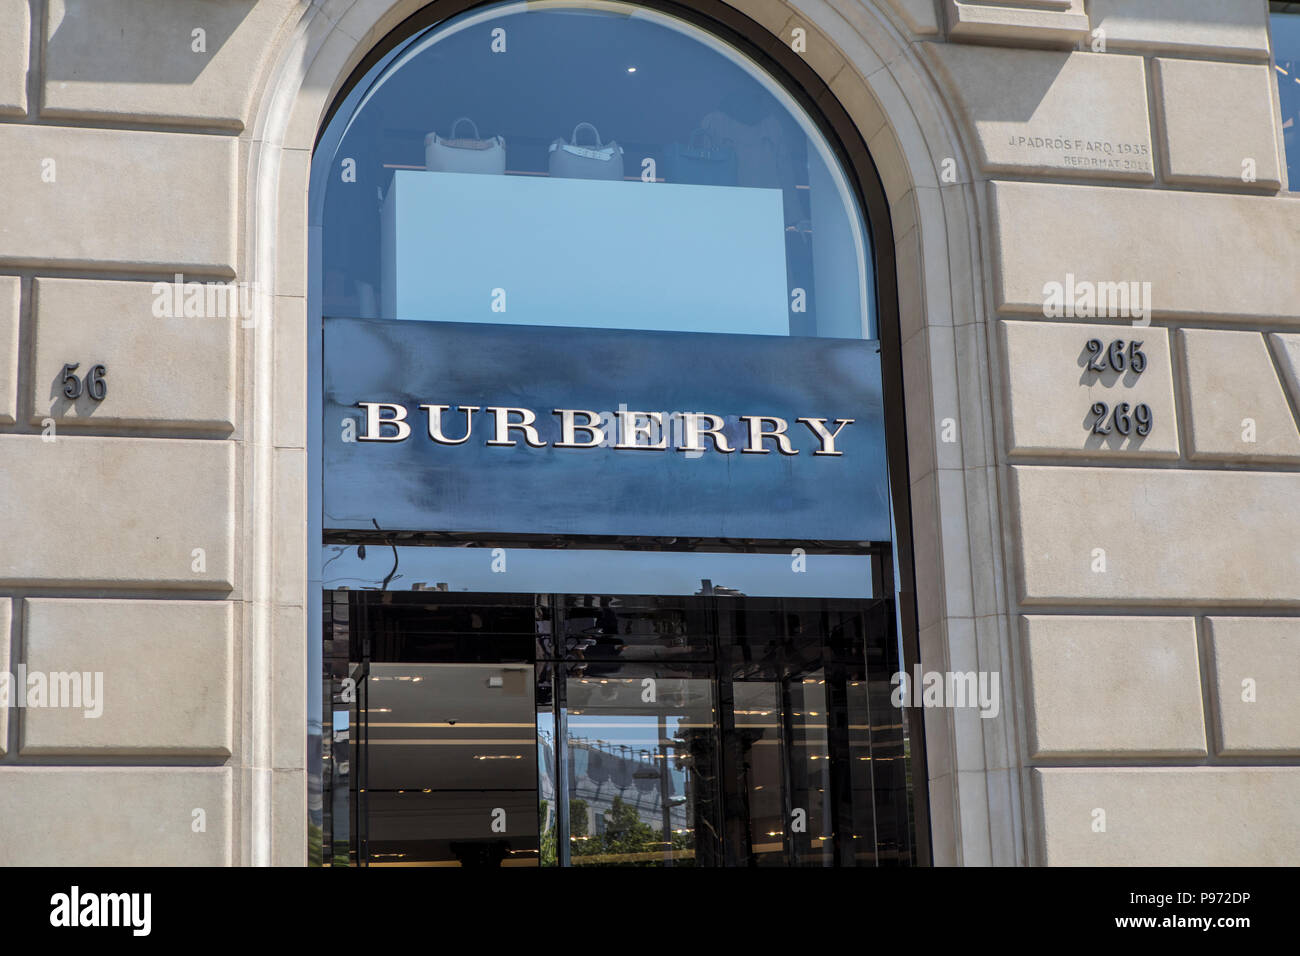 Burberry sign on Passeig de Gràcia street in Barcelona. Barcelona is a city  in Spain. It